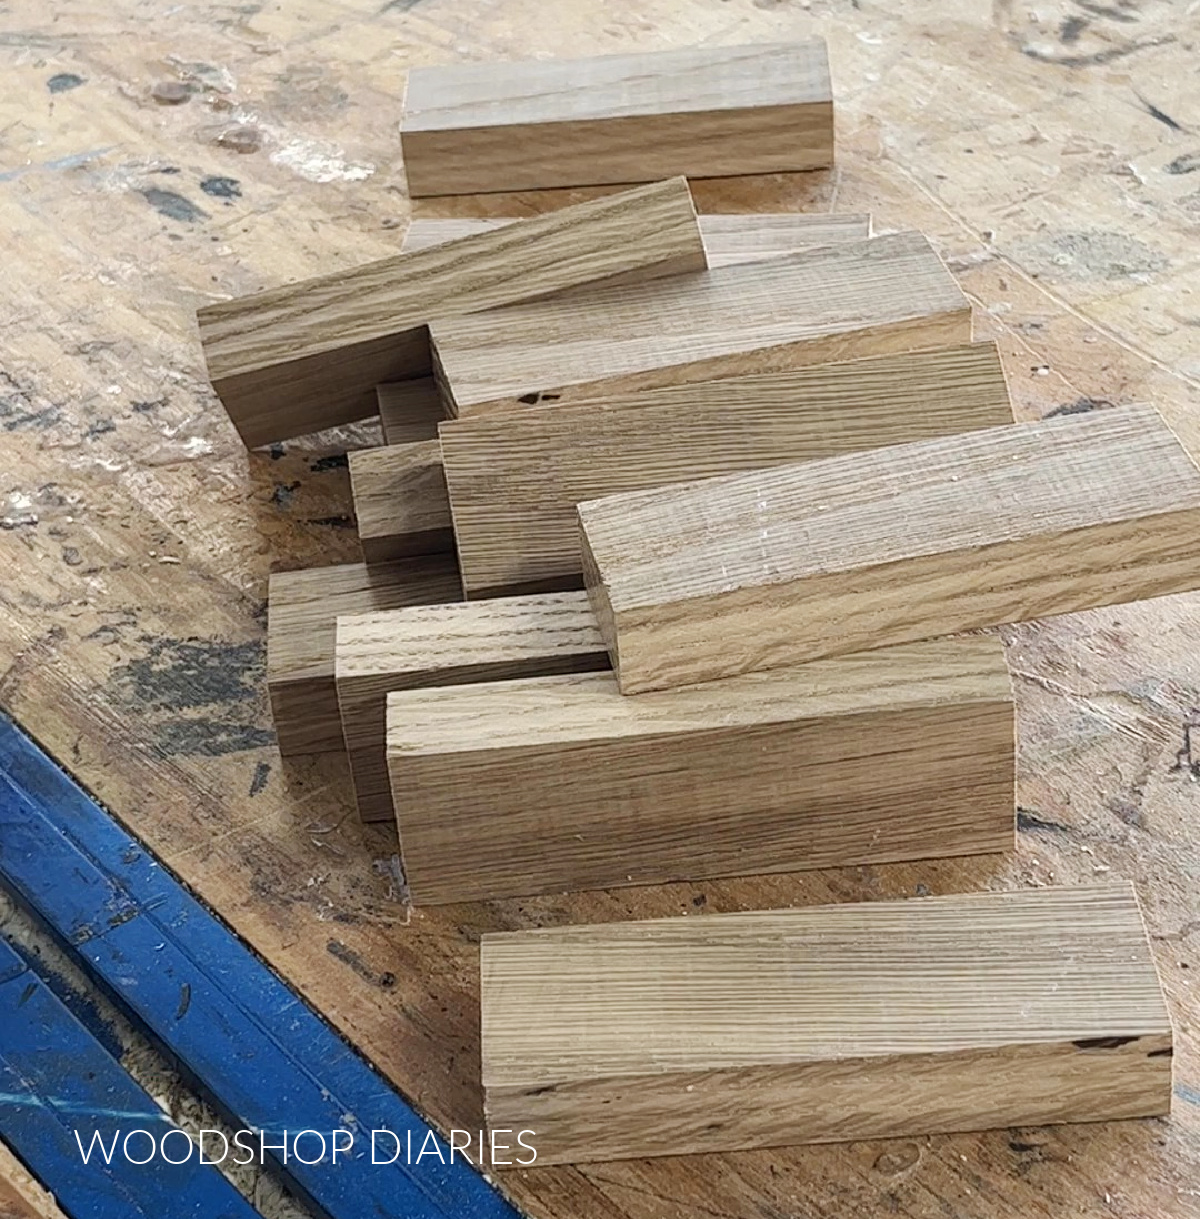 Oak blocks cut to length to assemble simple wooden drink coasters